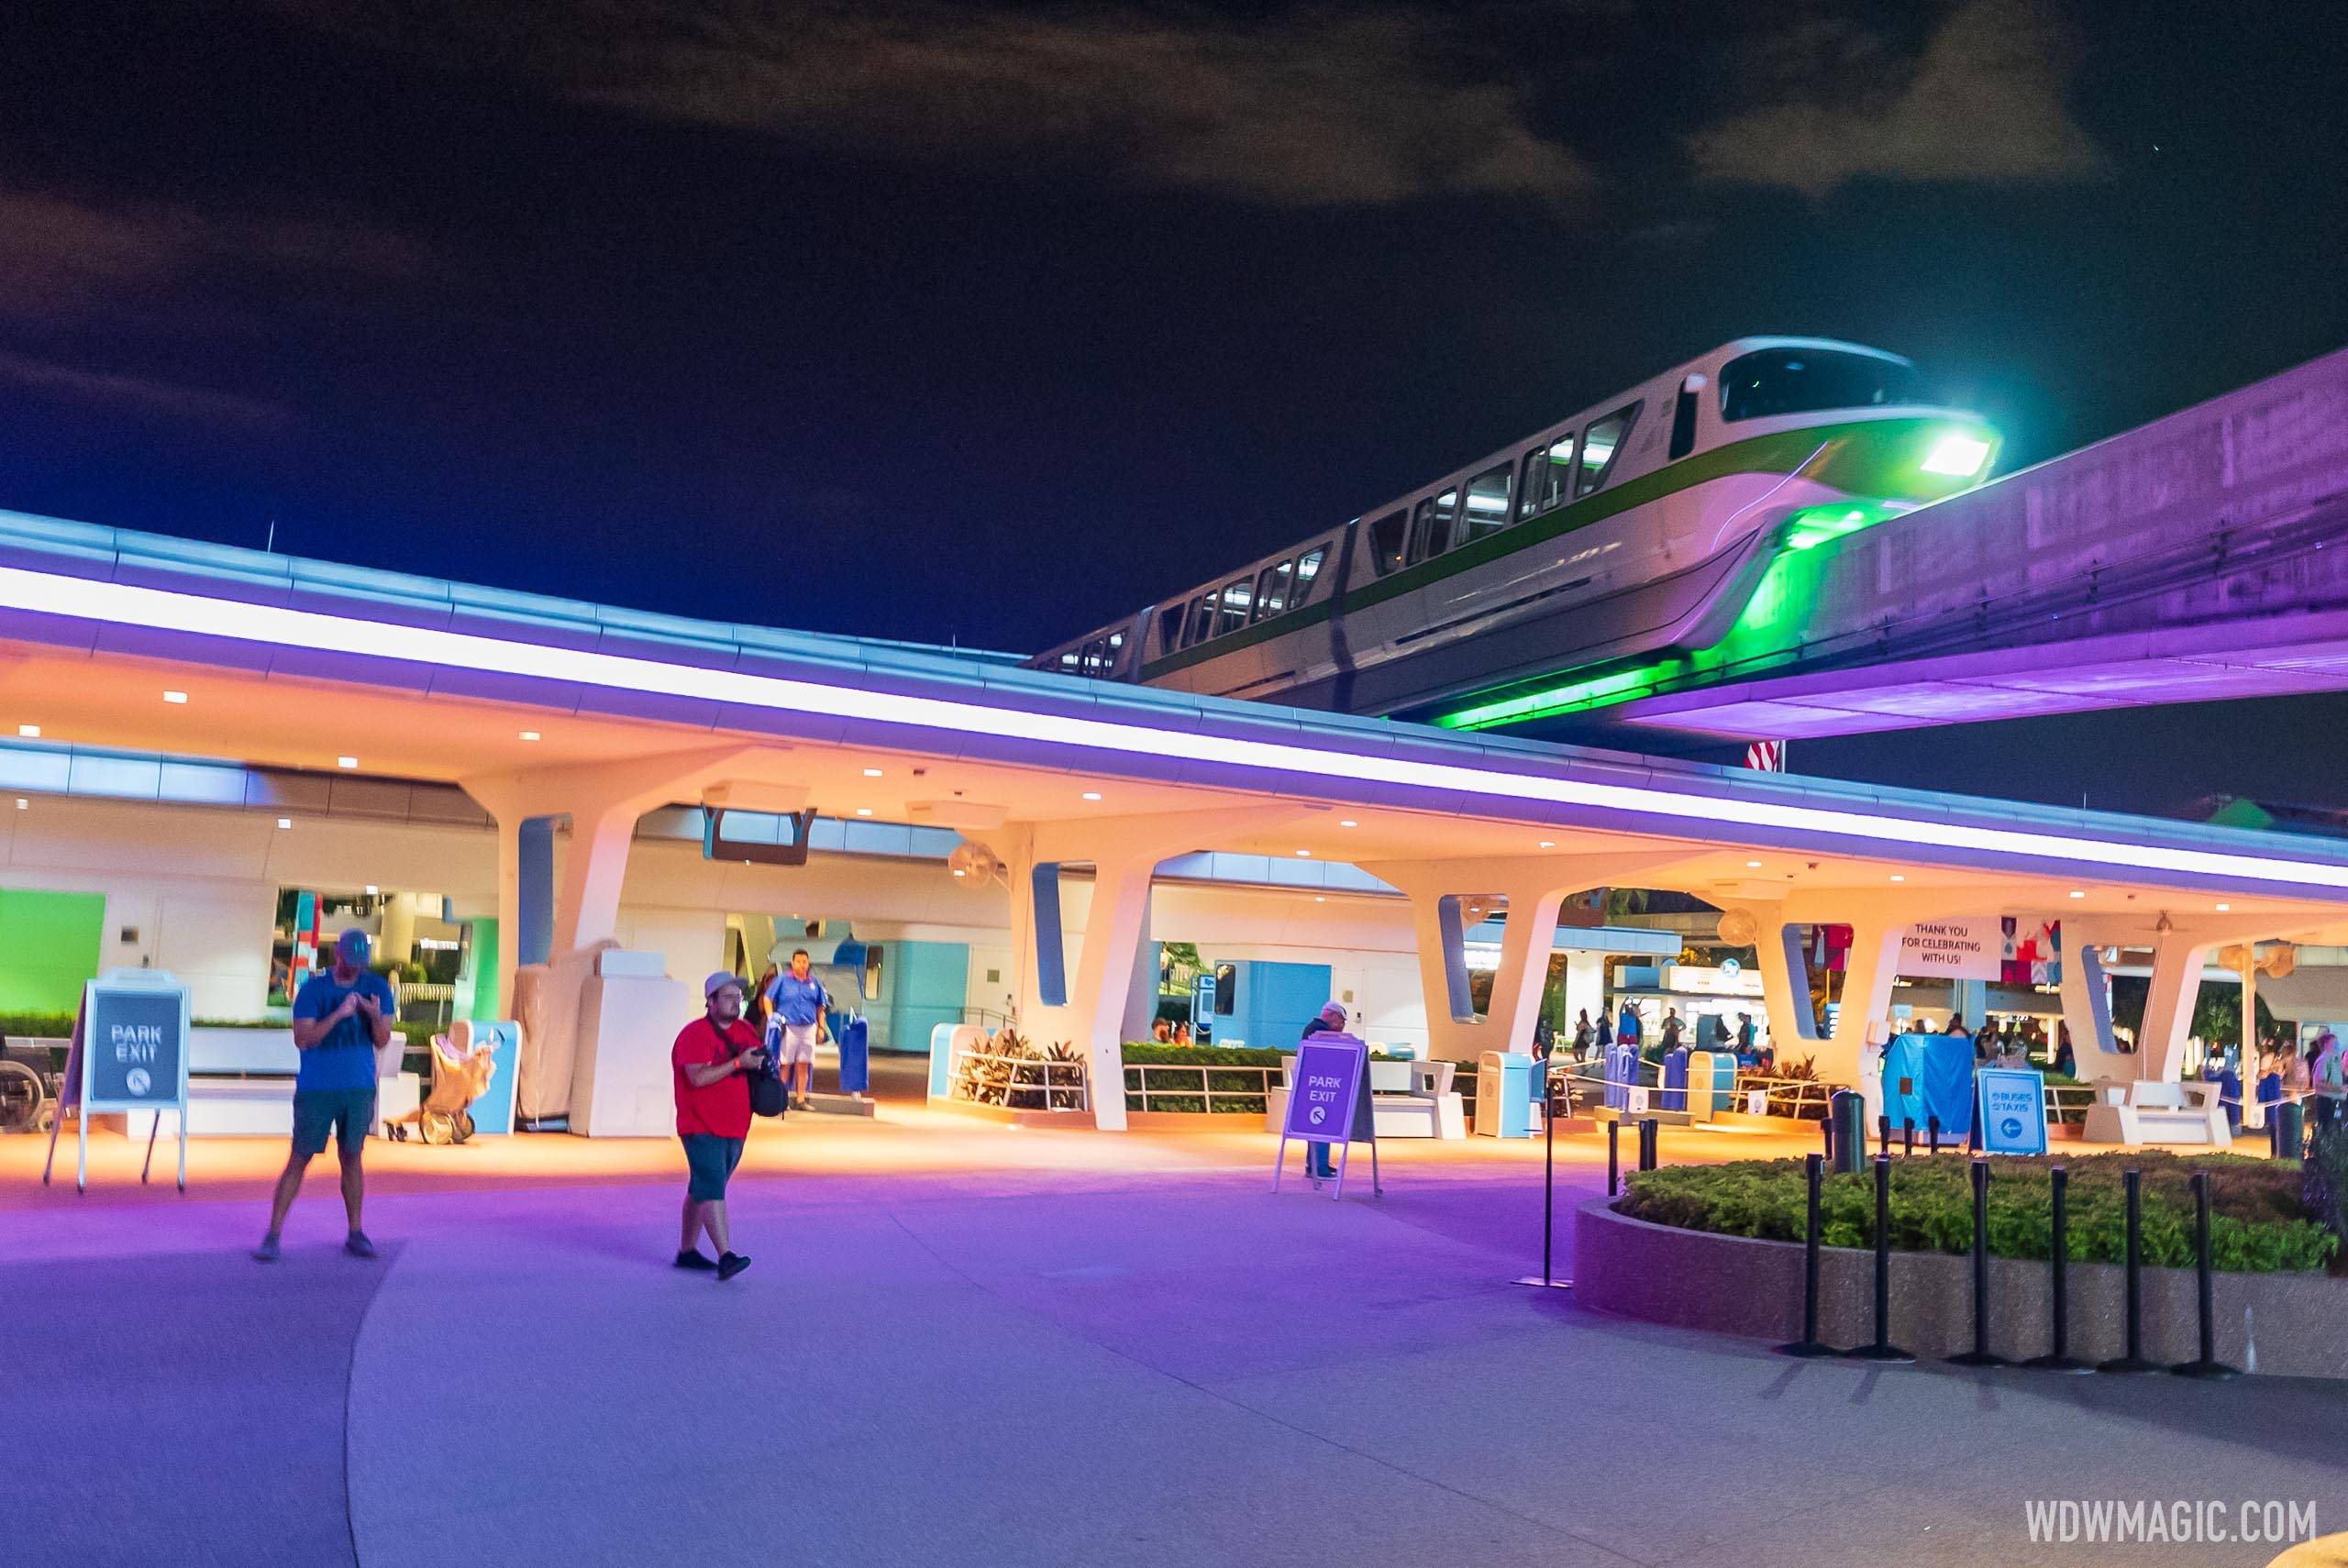 Glowing lights added to Walt Disney World monorails for the 50th anniversary